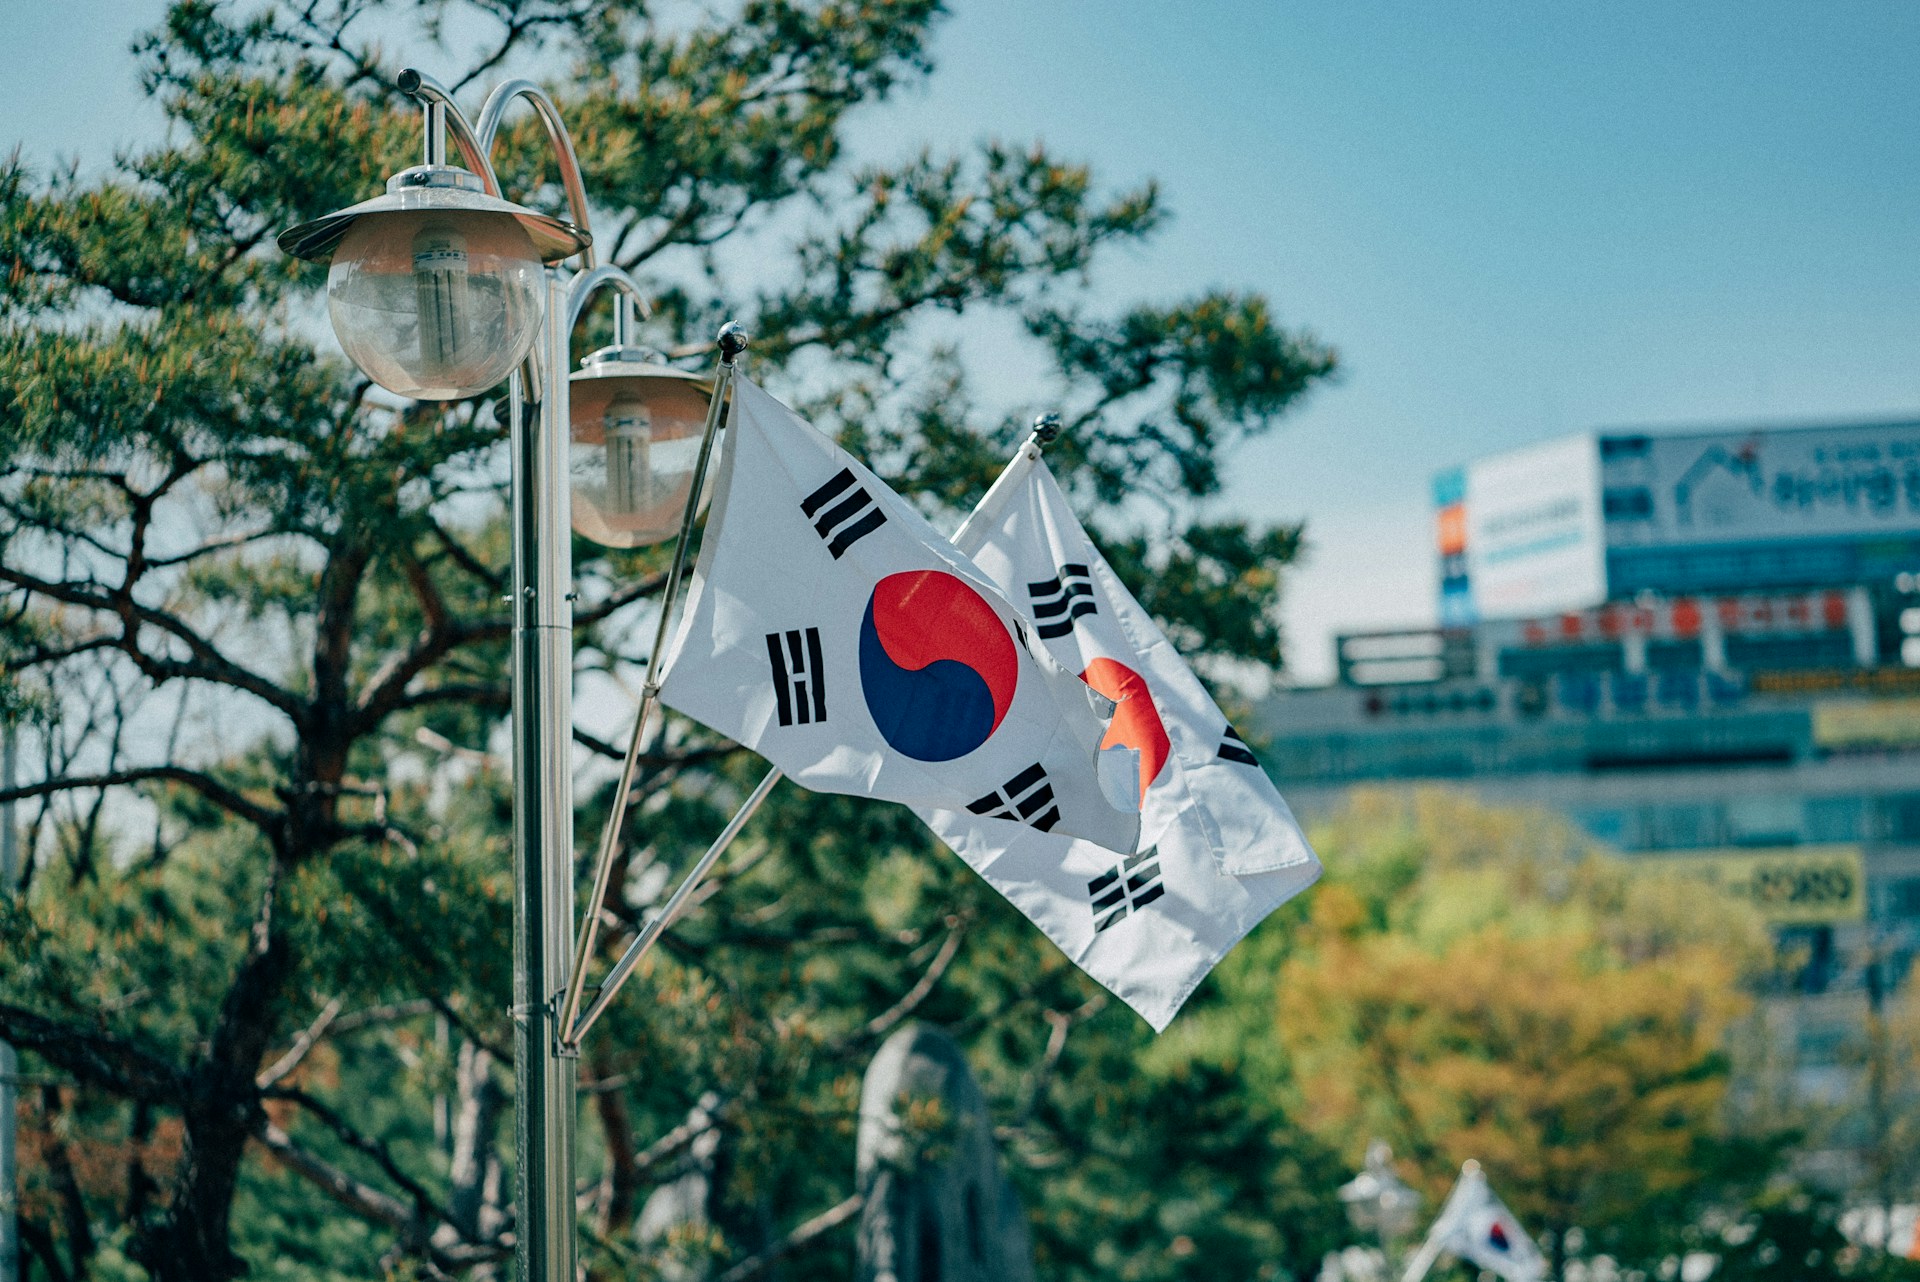 Lawmakers in South Korea seek three-year extension on crypto tax implementation, potentially pushing it to 2028 from 2025.